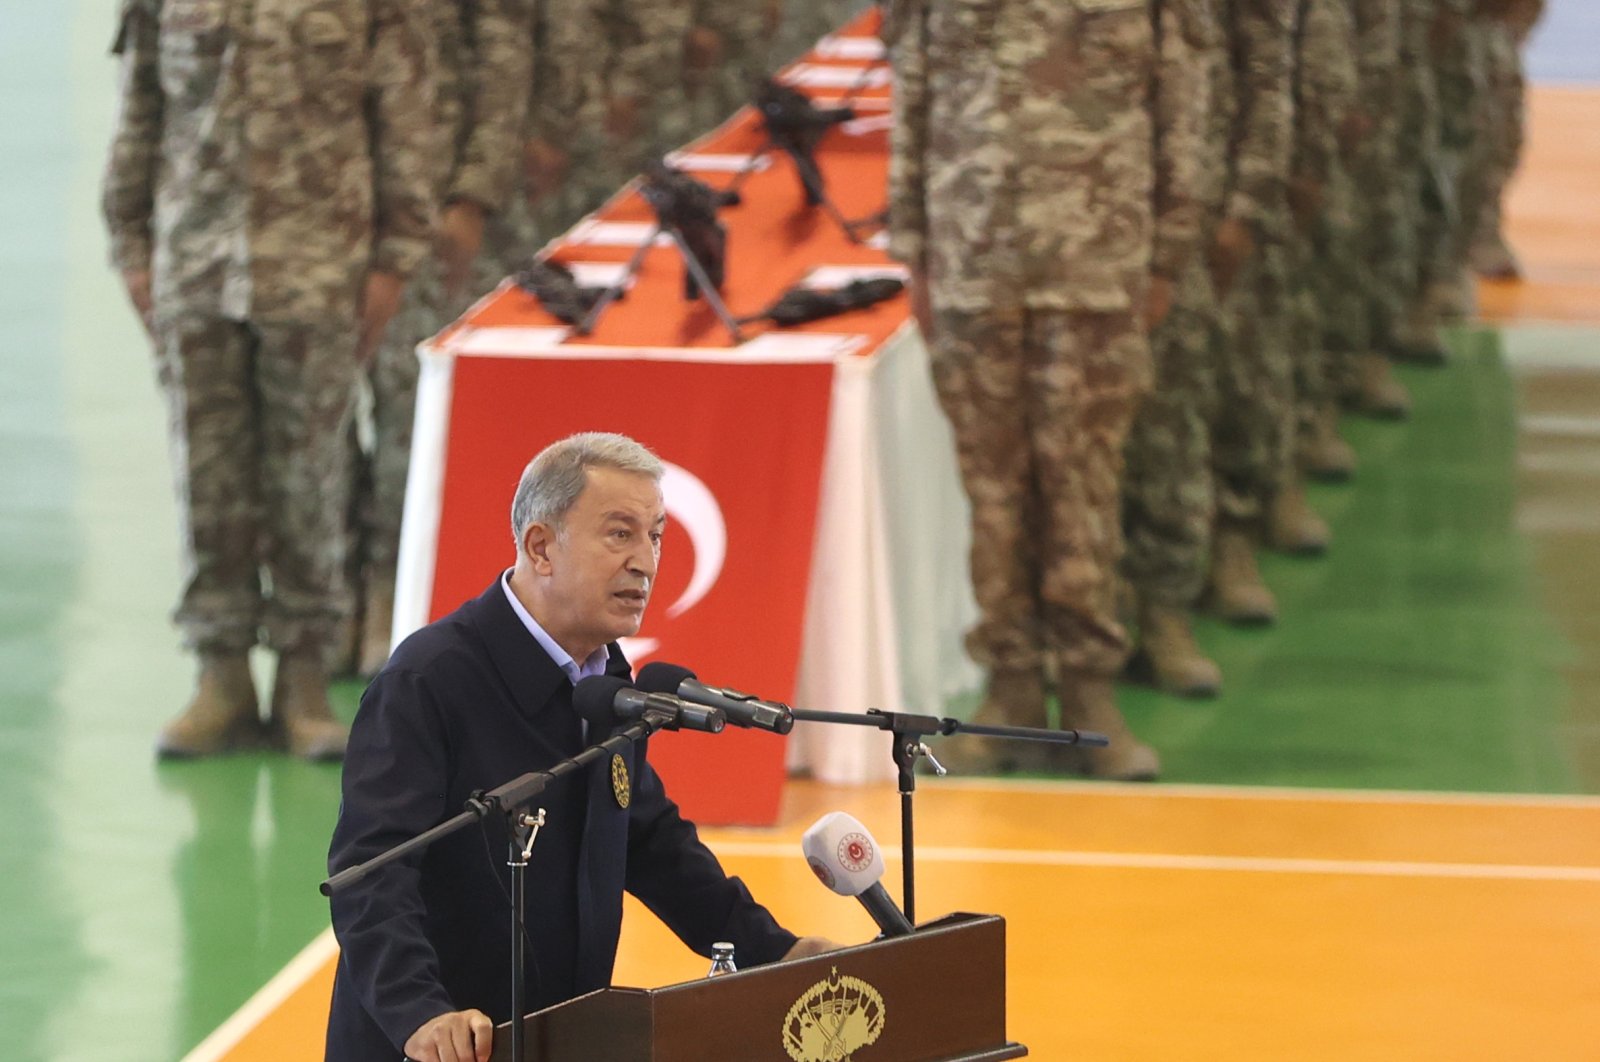 Defense Minister Hulusi Akar speaks at a swearing-in ceremony for Maroon Berets who successfully completed a 47-week special training program in Ankara, Turkey, Aug. 7, 2021. (AA Photo)